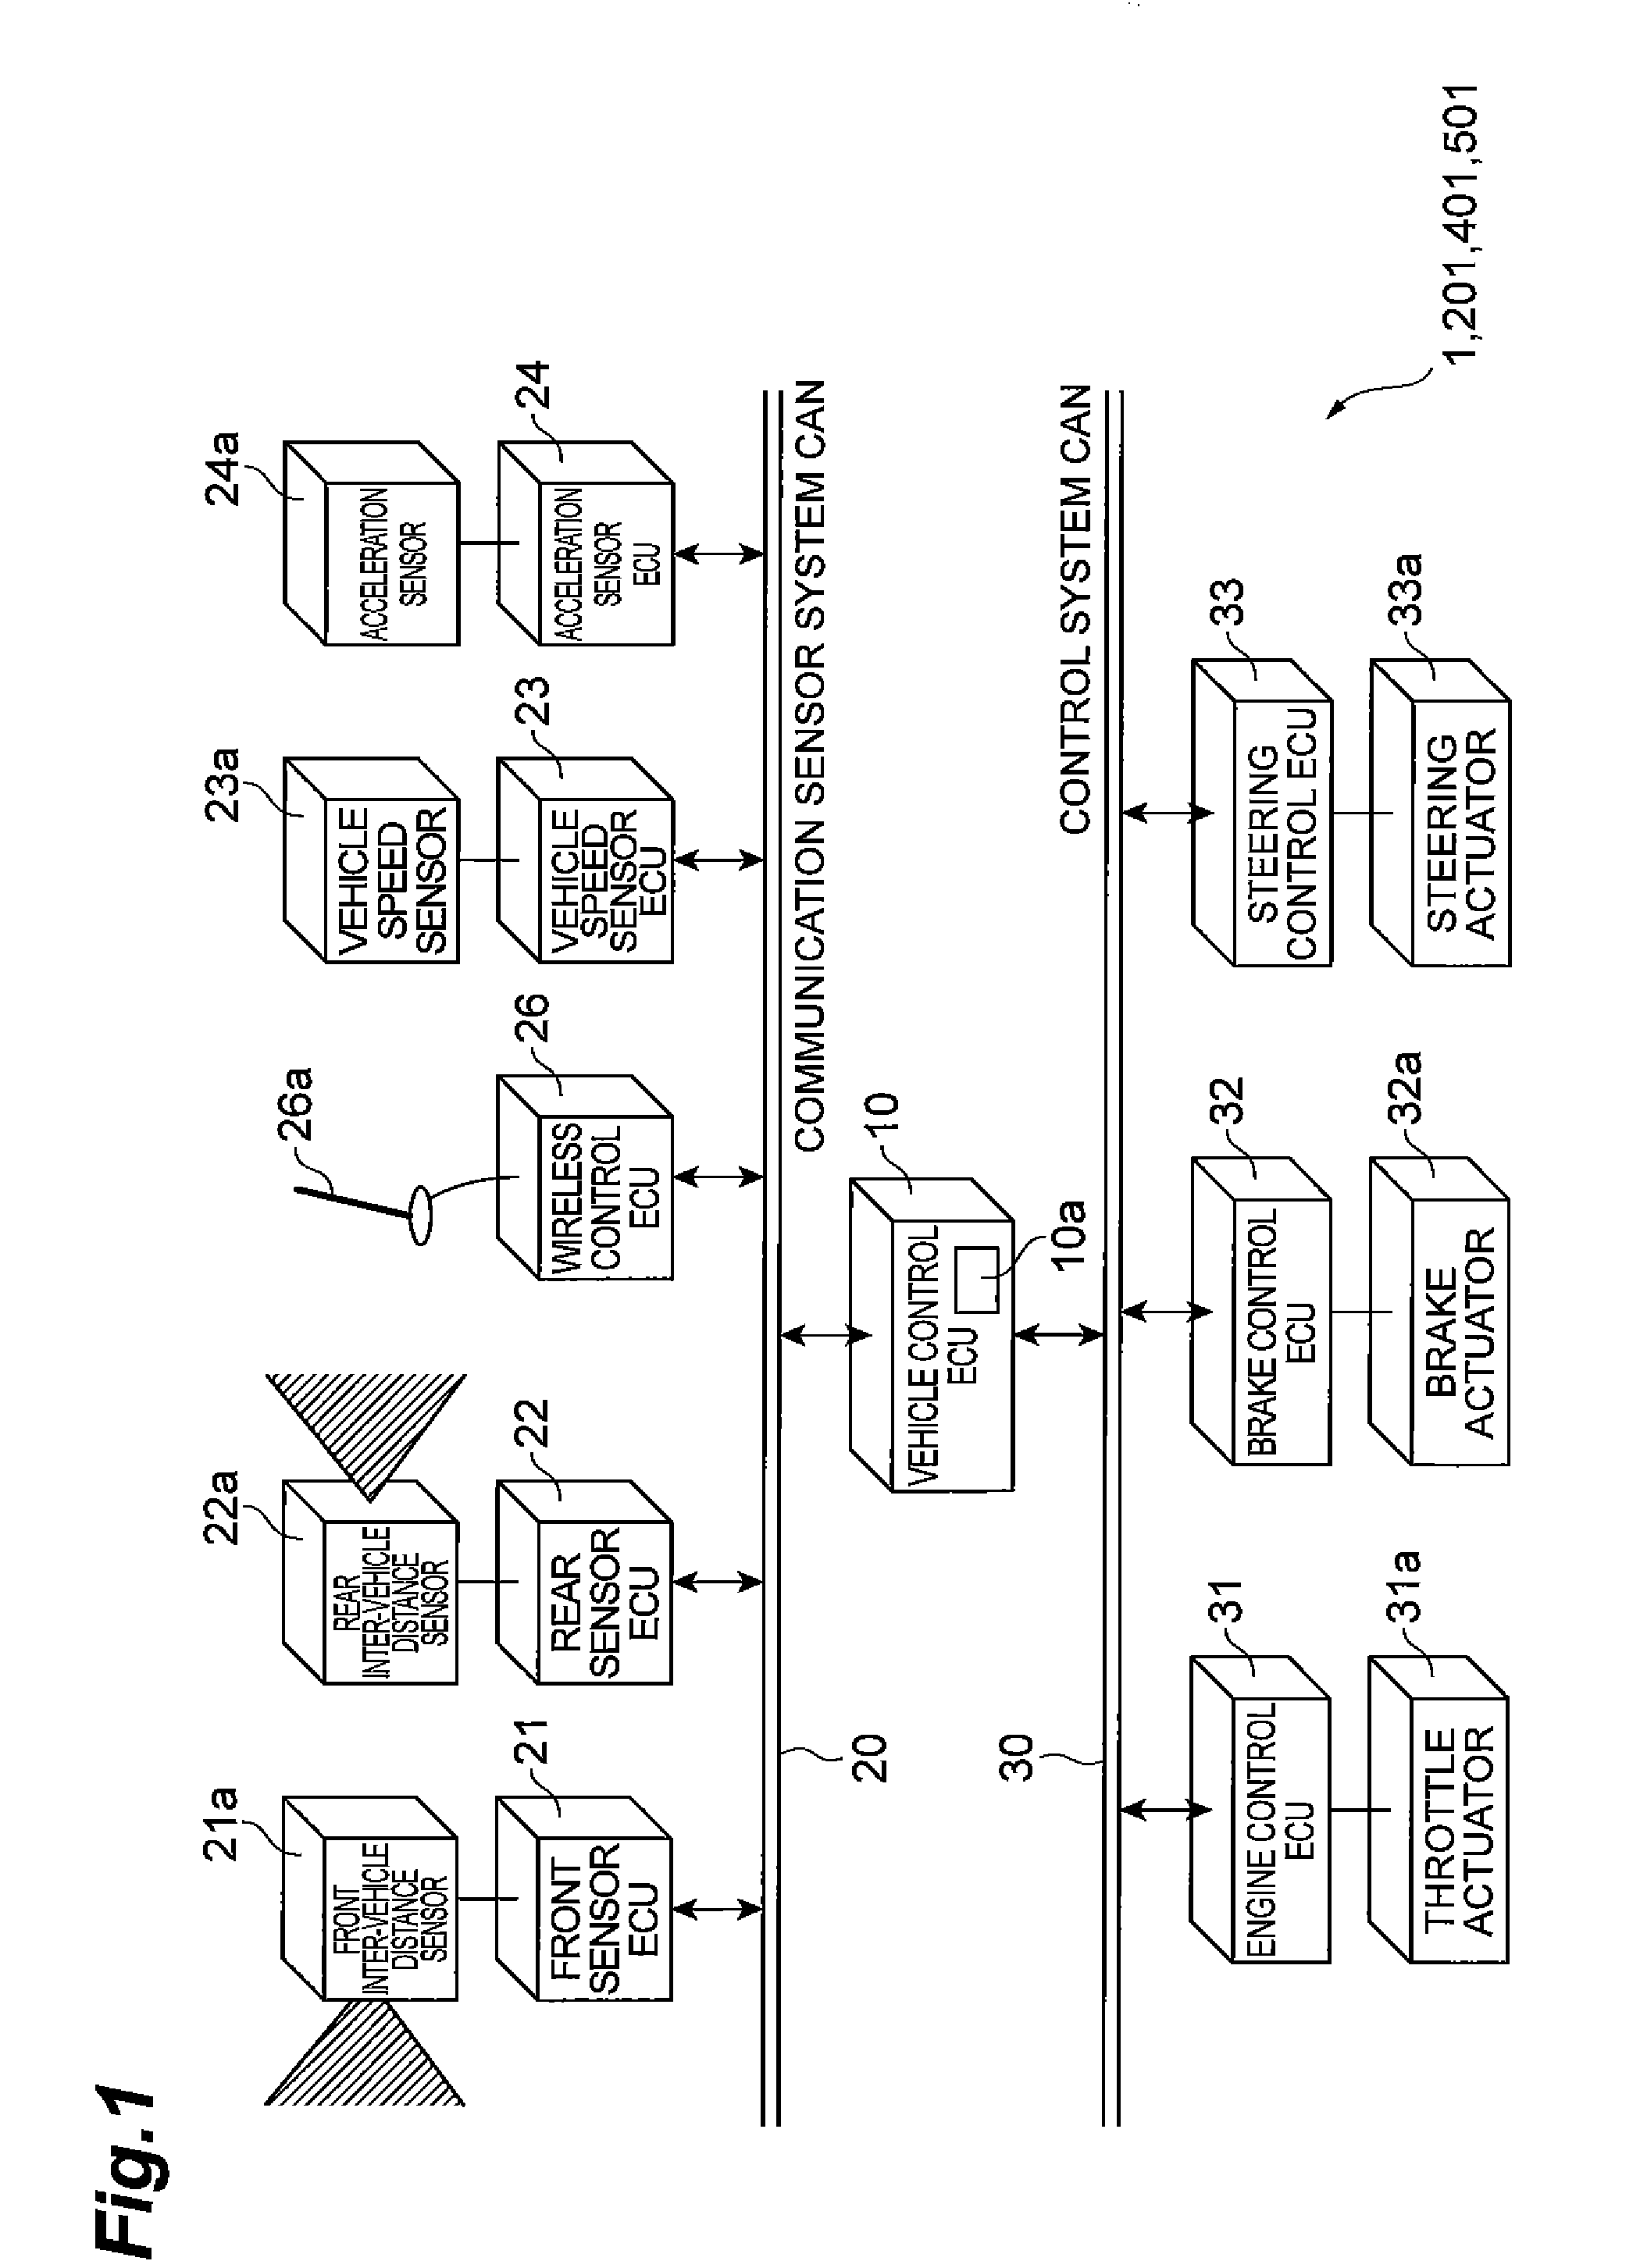 Row running control system and vehicle